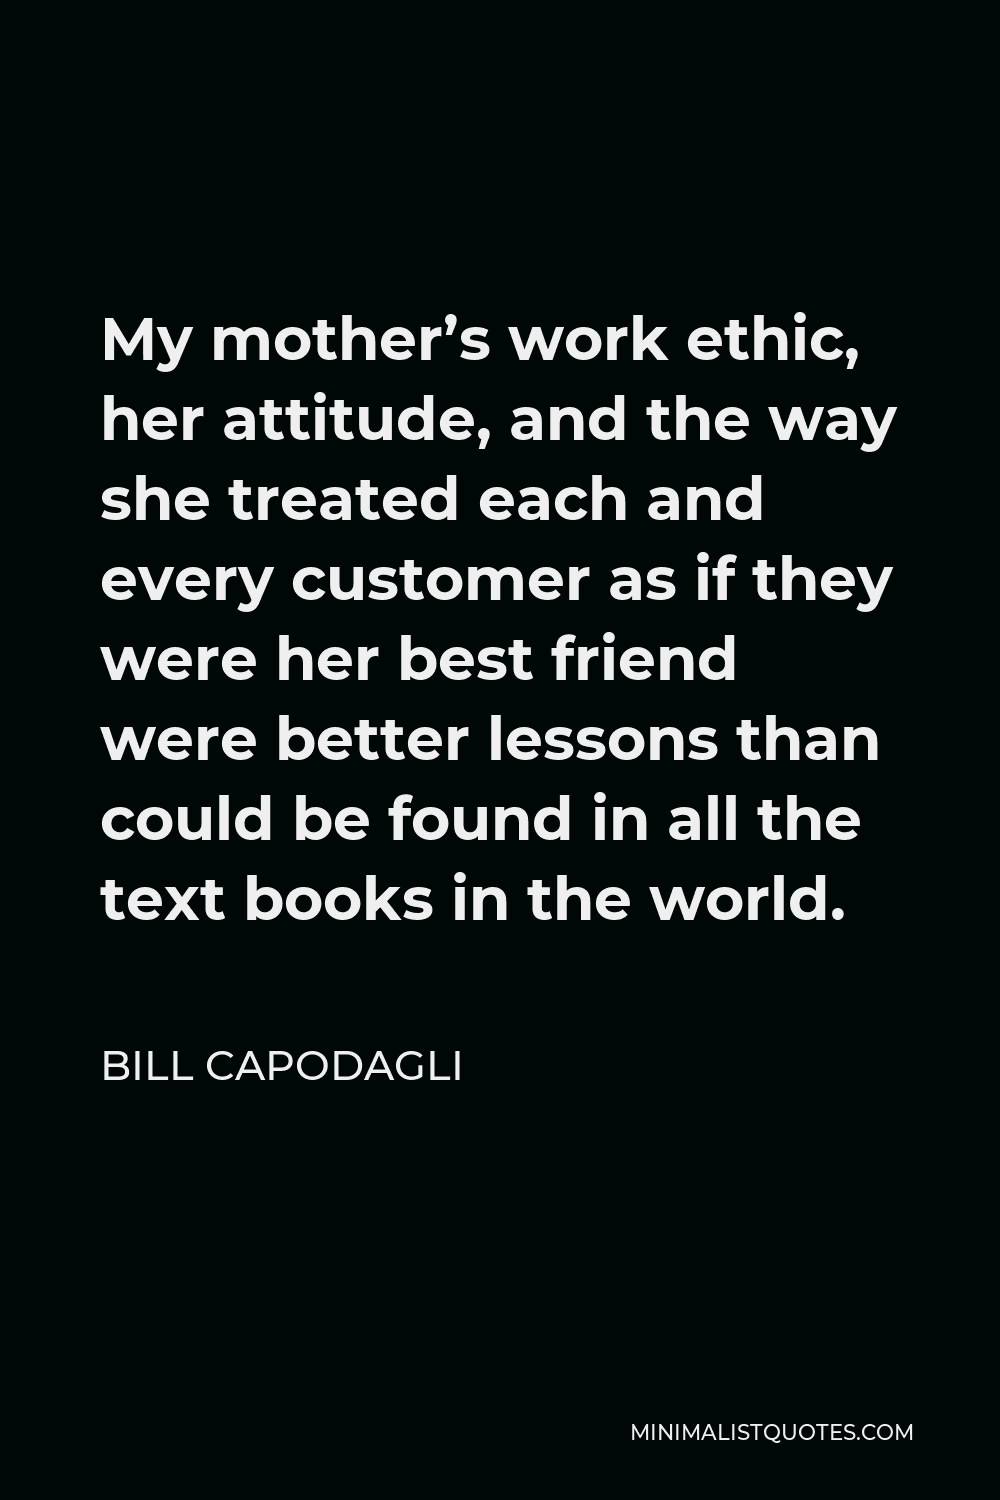 Bill Capodagli Quote - My mother’s work ethic, her attitude, and the way she treated each and every customer as if they were her best friend were better lessons than could be found in all the text books in the world.